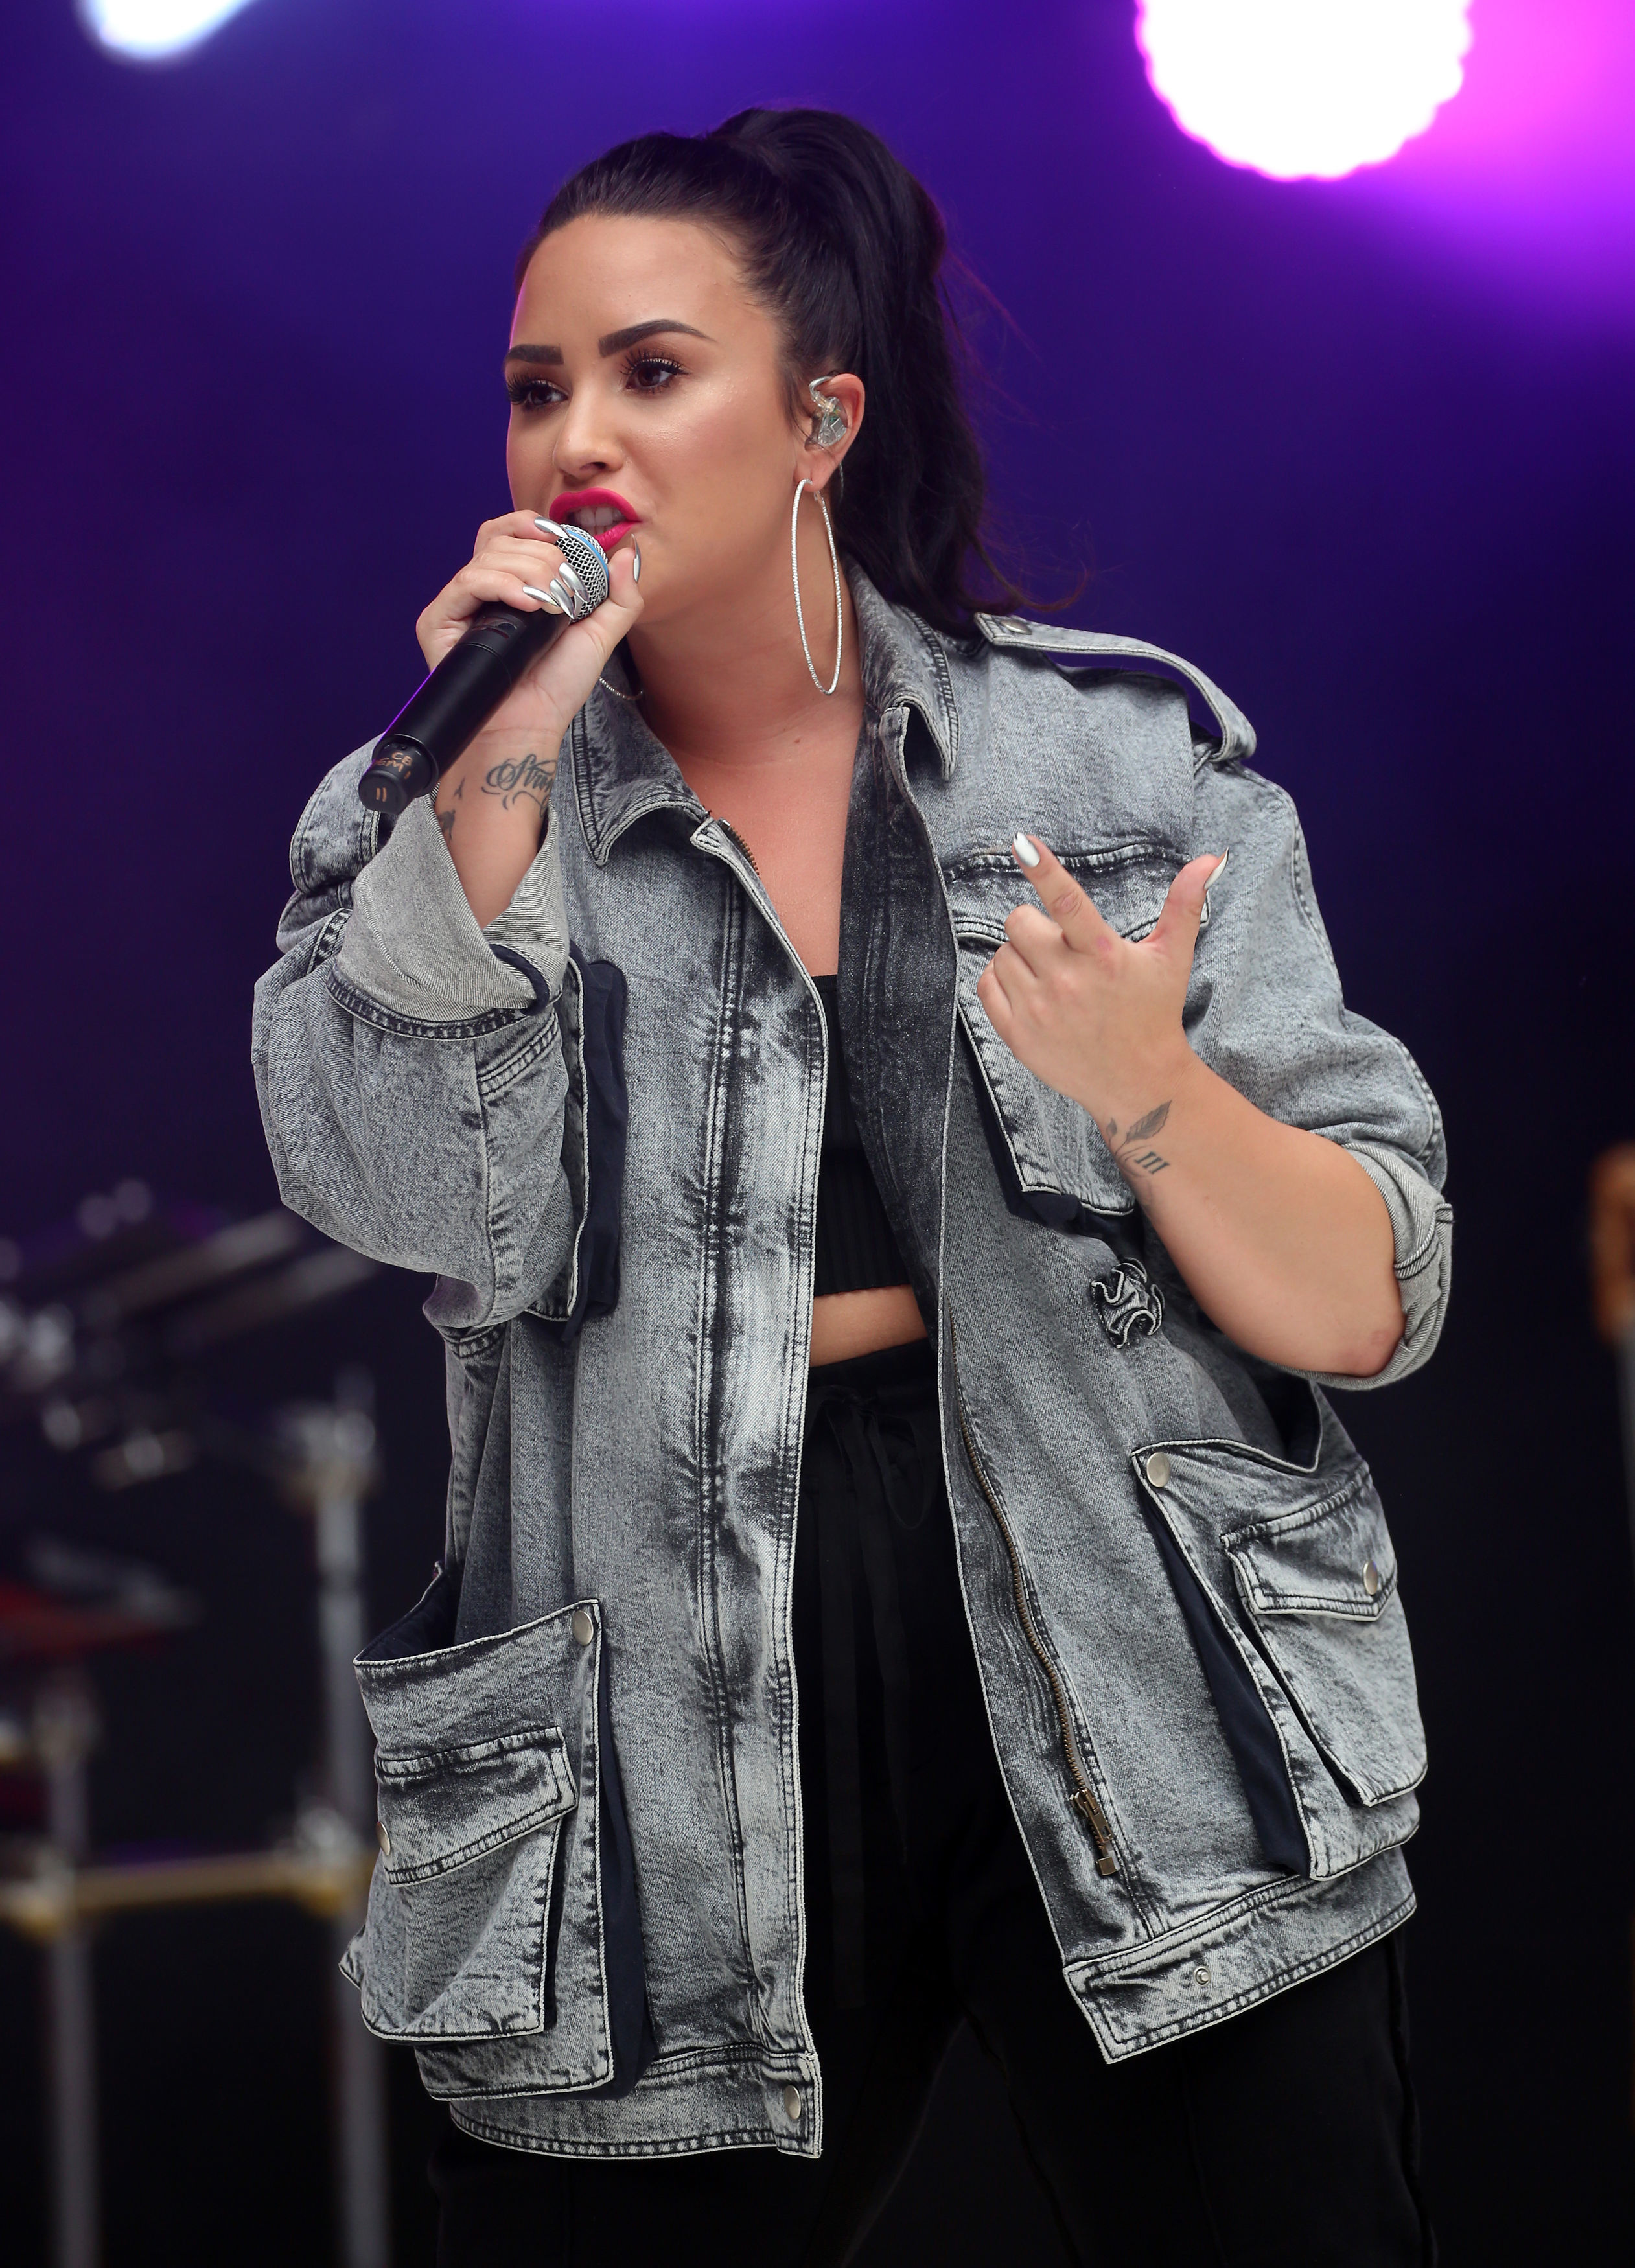 Demi Lovato in hospital after ‘overdose’: What to do if a loved one has relapsed ...